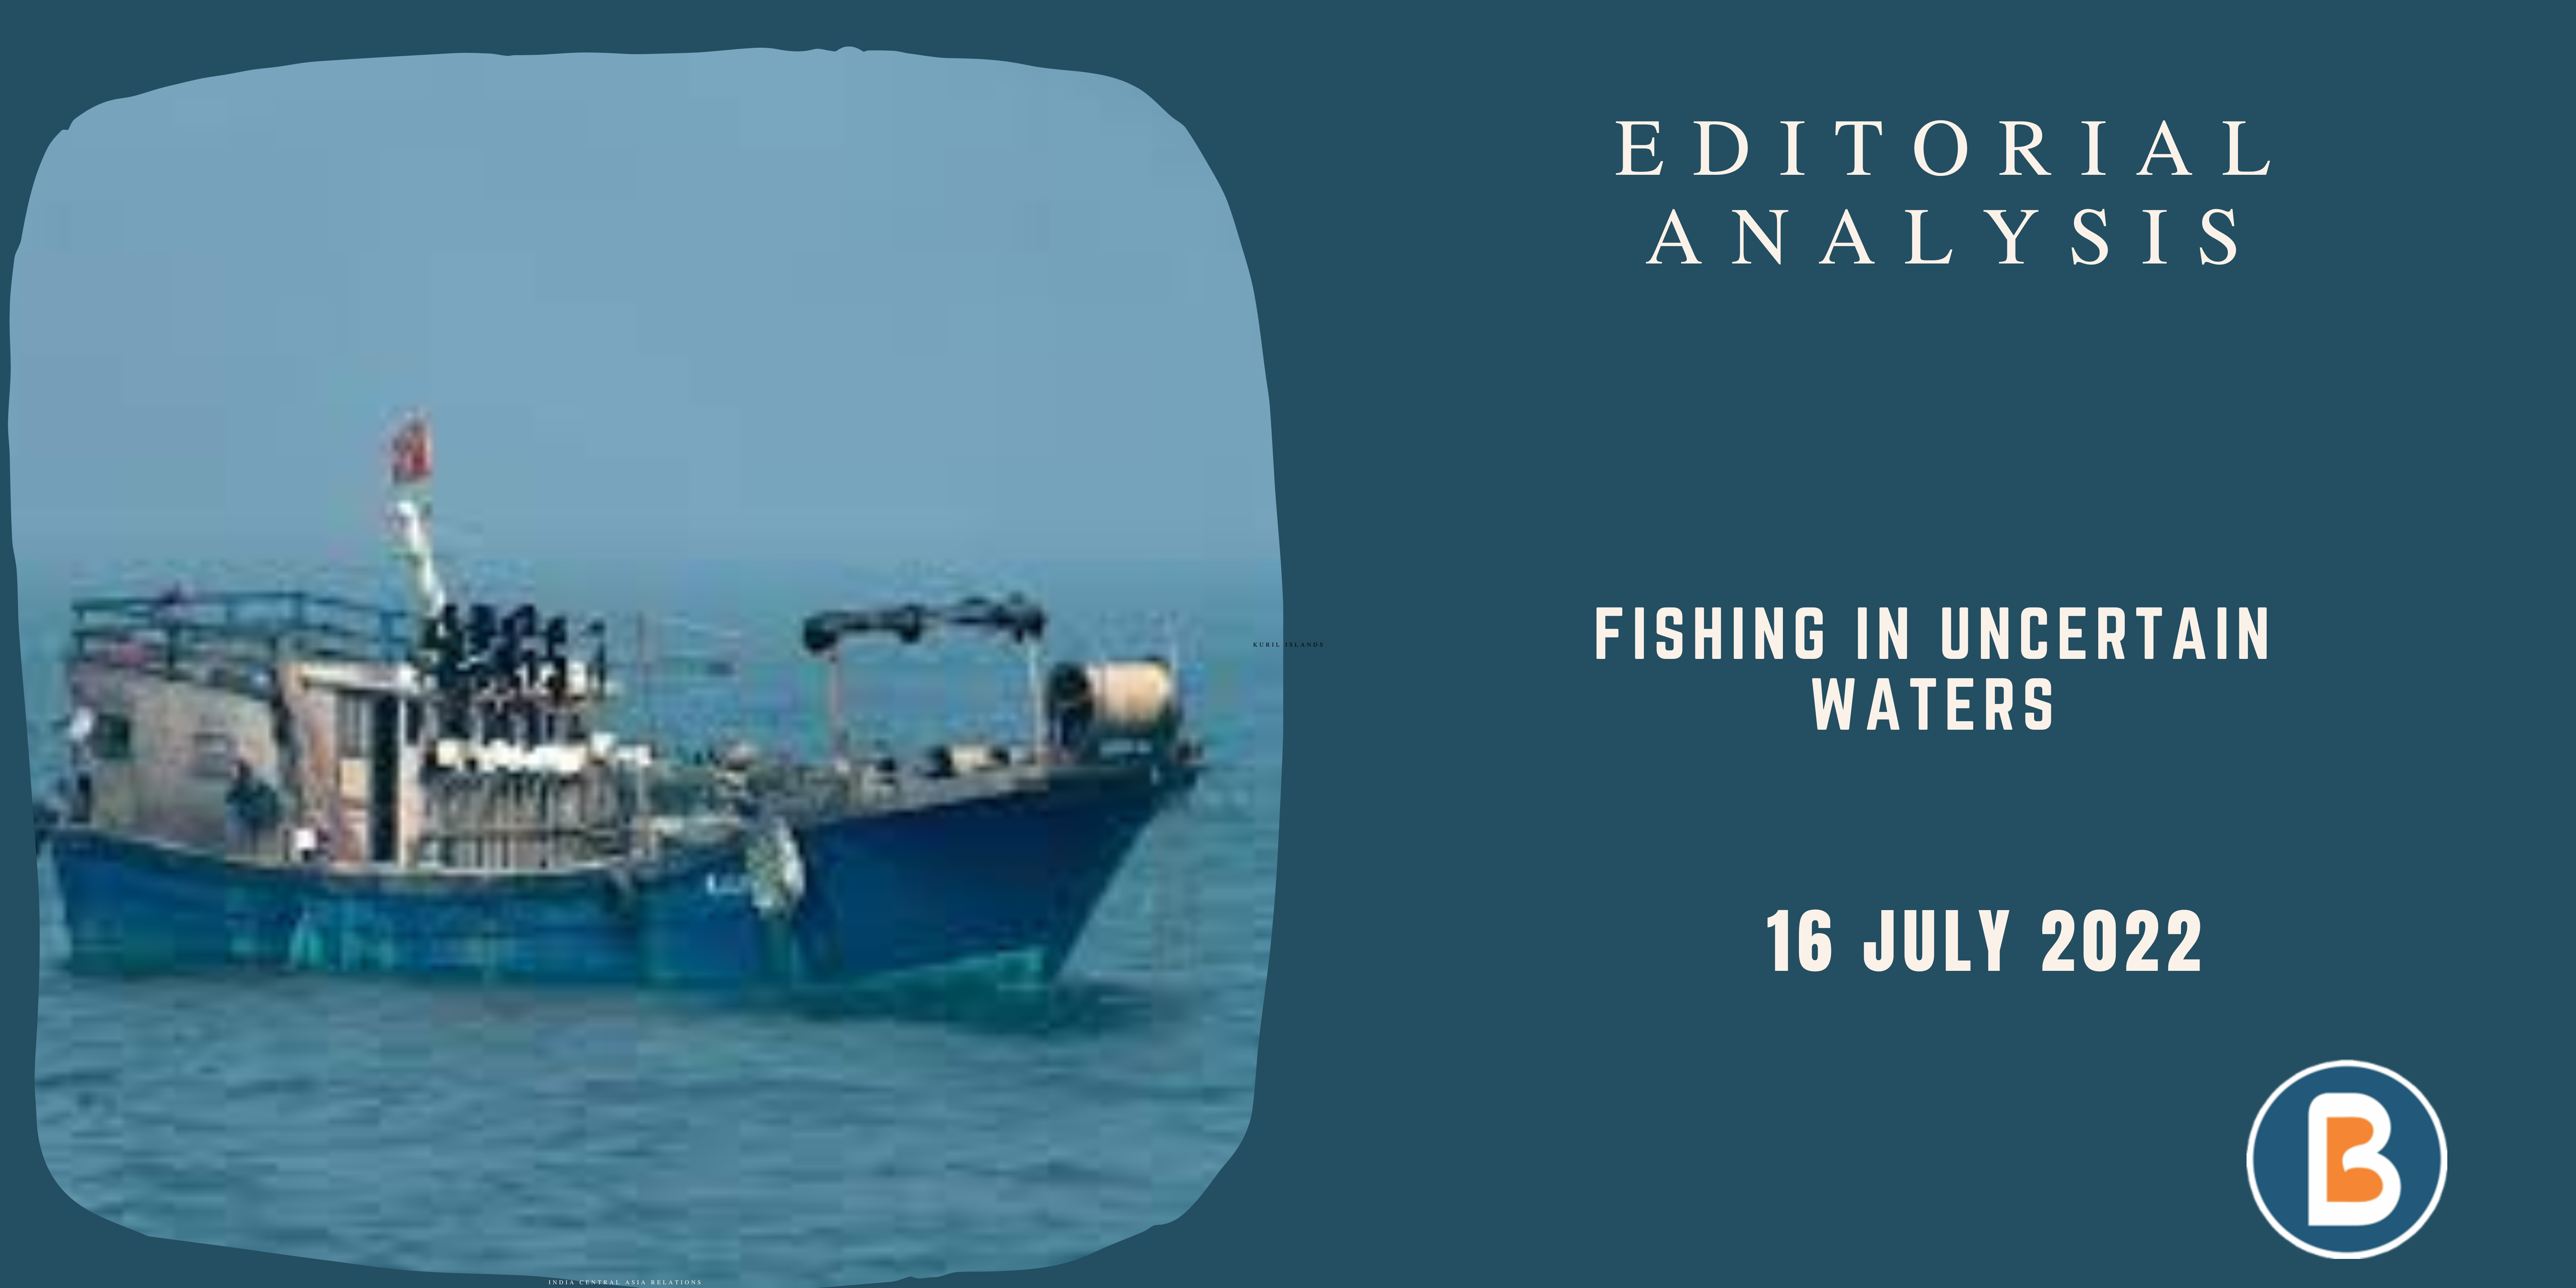 Editorial Analysis for IAS - Fishing in Uncertain Waters